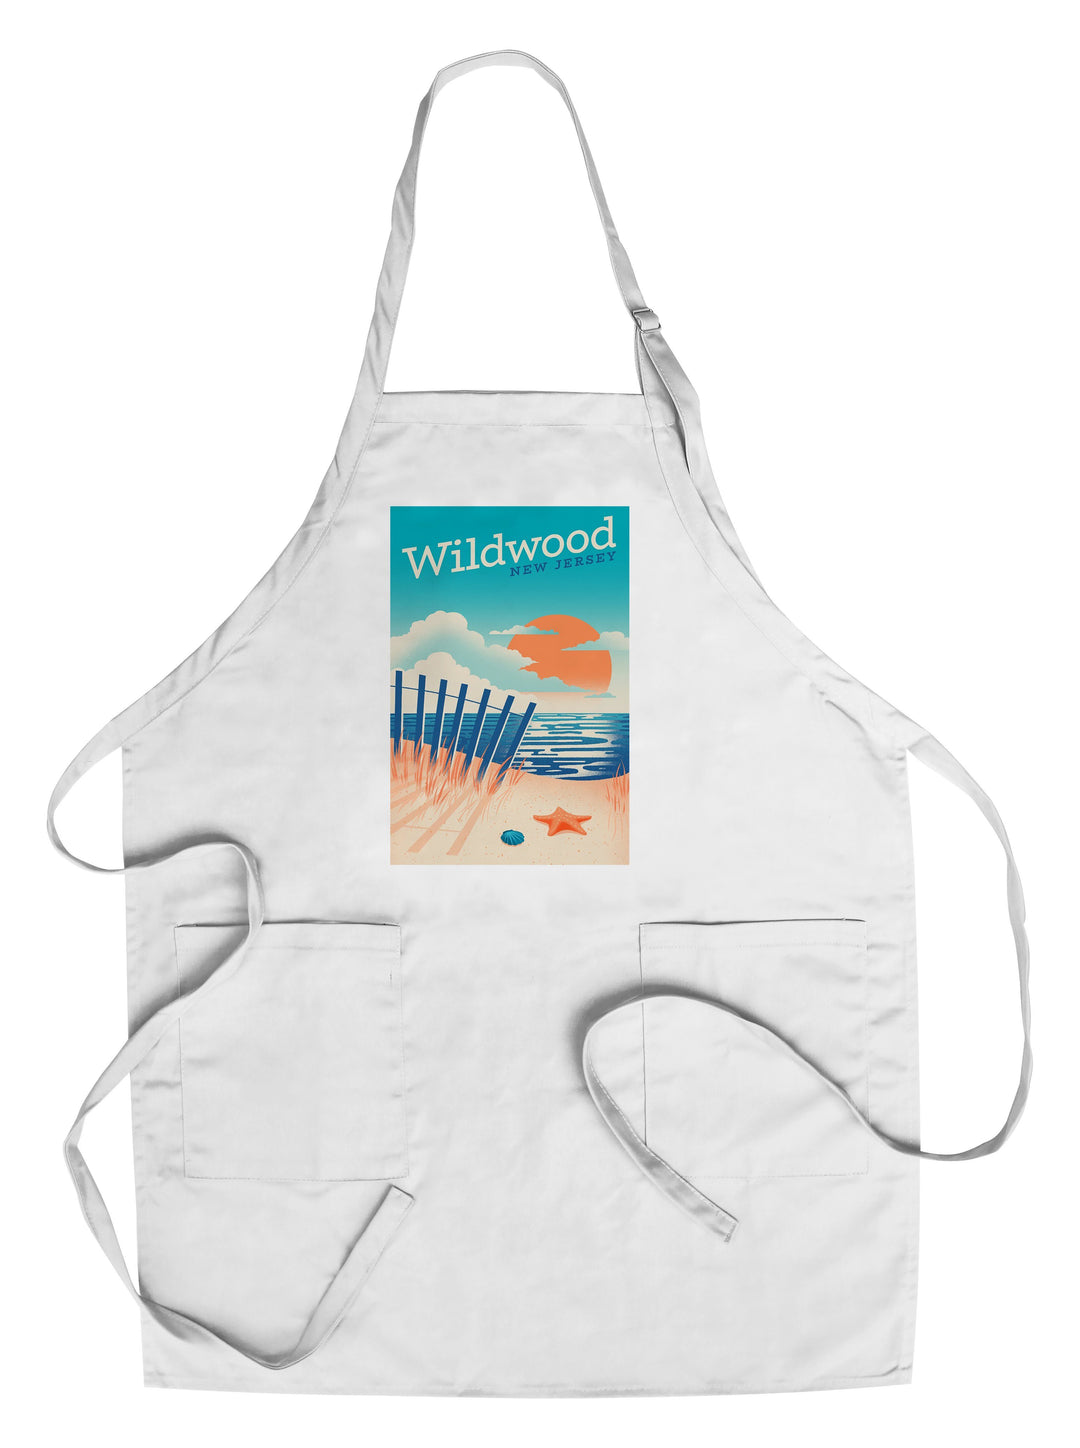 Wildwood, New Jersey, Sun-faded Shoreline Collection, Glowing Shore, Beach Scene, Towels and Aprons Kitchen Lantern Press Chef's Apron 